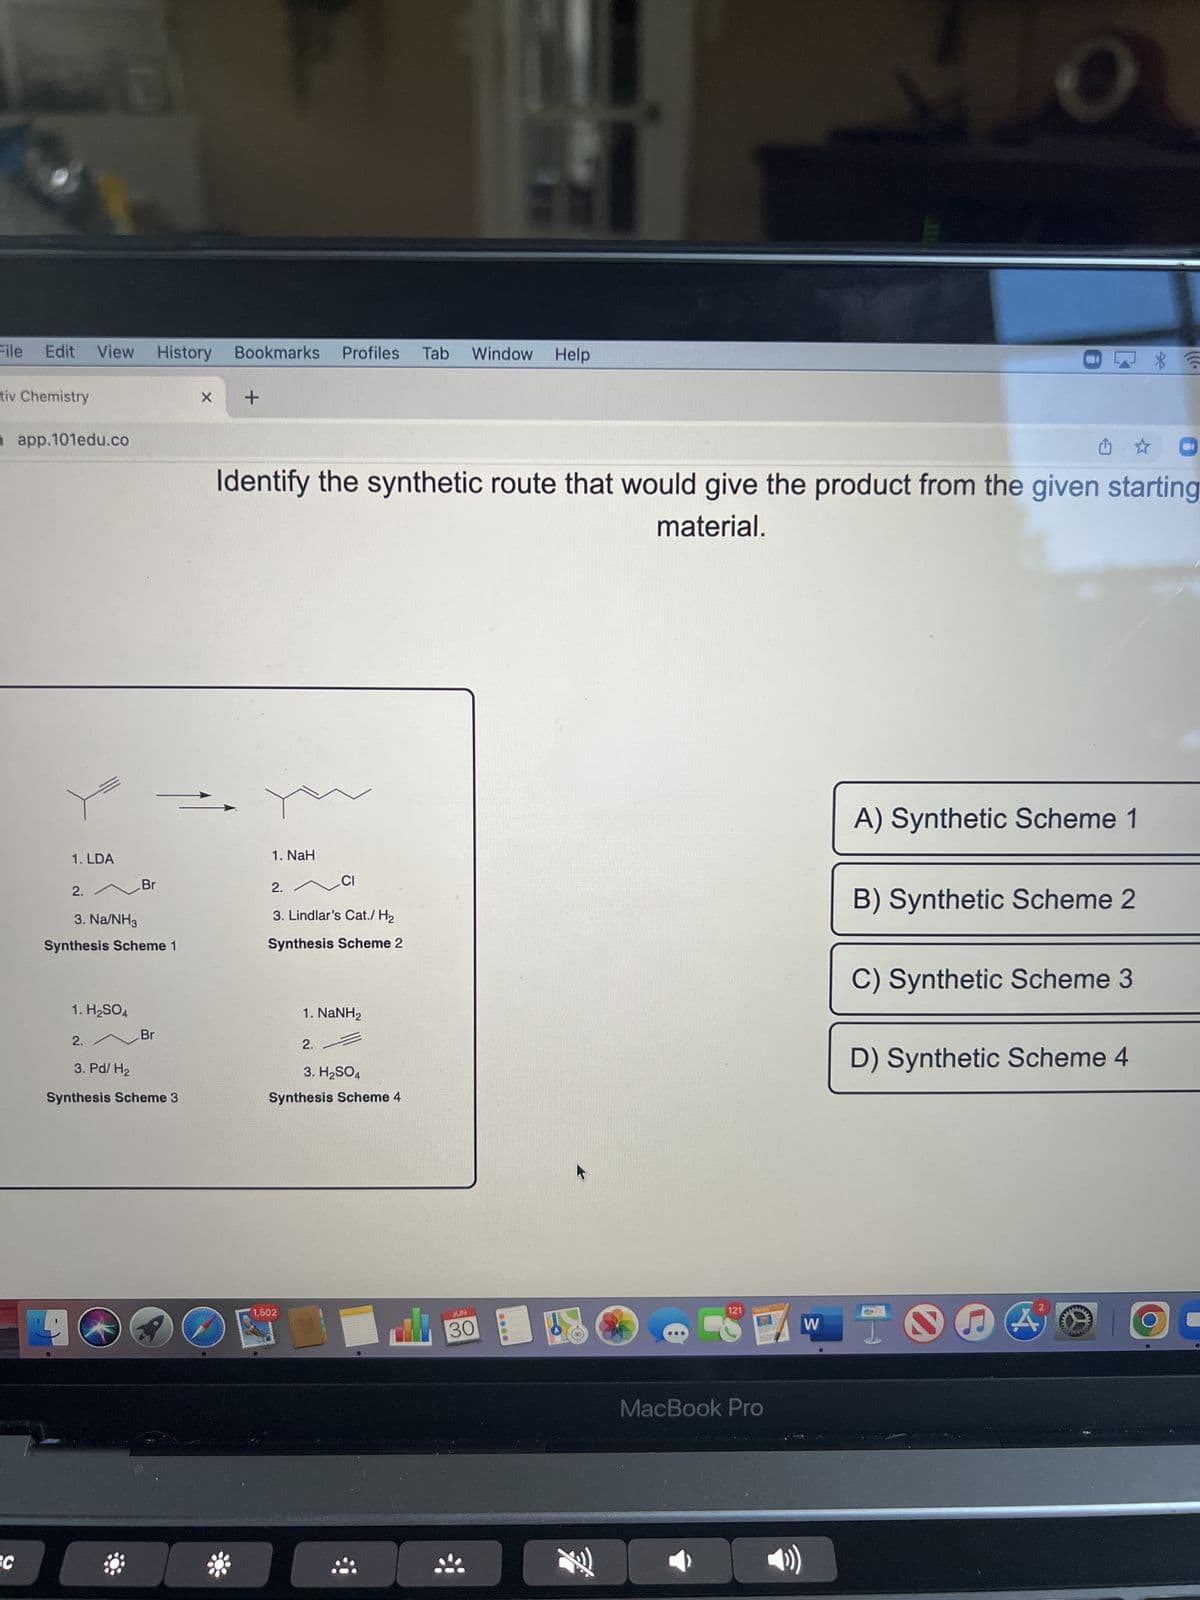 20
File
SC
Edit View History Bookmarks Profiles Tab Window Help
tiv Chemistry
app.101edu.co
1. LDA
2.
3. Na/NH3
Synthesis Scheme 1
1. H₂SO4
Br
2.
Br
3. Pd/H₂
Synthesis Scheme 3
X +
✩✩
Identify the synthetic route that would give the product from the given starting
material.
DO
*
1. NaH
2. /
3. Lindlar's Cat./ H₂
Synthesis Scheme 2
CI
1,502
1. NaNH2
2.
3. H₂SO4
Synthesis Scheme 4
M
JUN
30
121
MacBook Pro
))
W
O
A) Synthetic Scheme 1
B) Synthetic Scheme 2
C) Synthetic Scheme 3
D) Synthetic Scheme 4
A
A